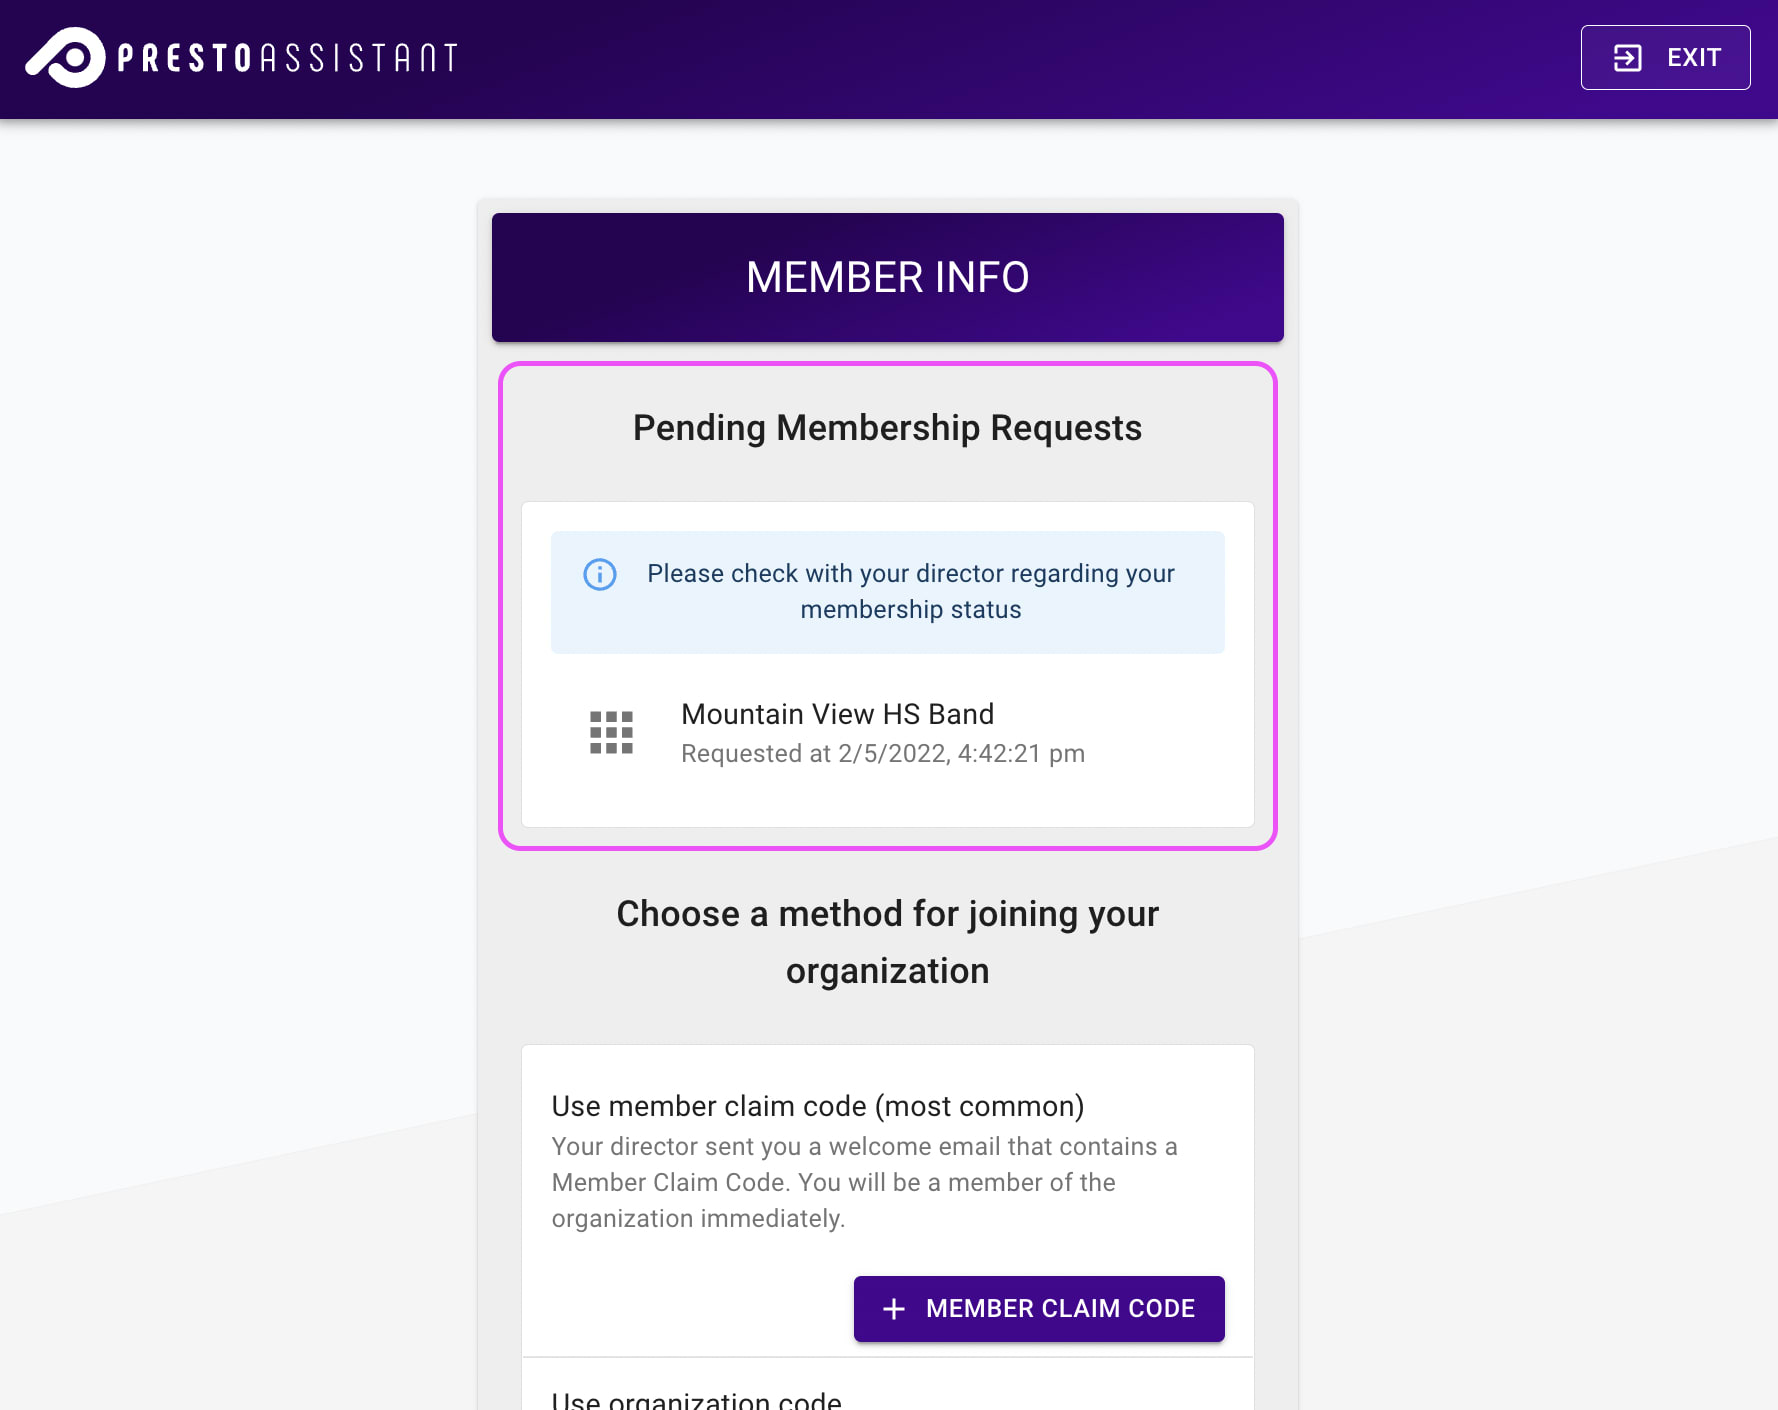 Member Info page highlighting the list of pending organization memberships.